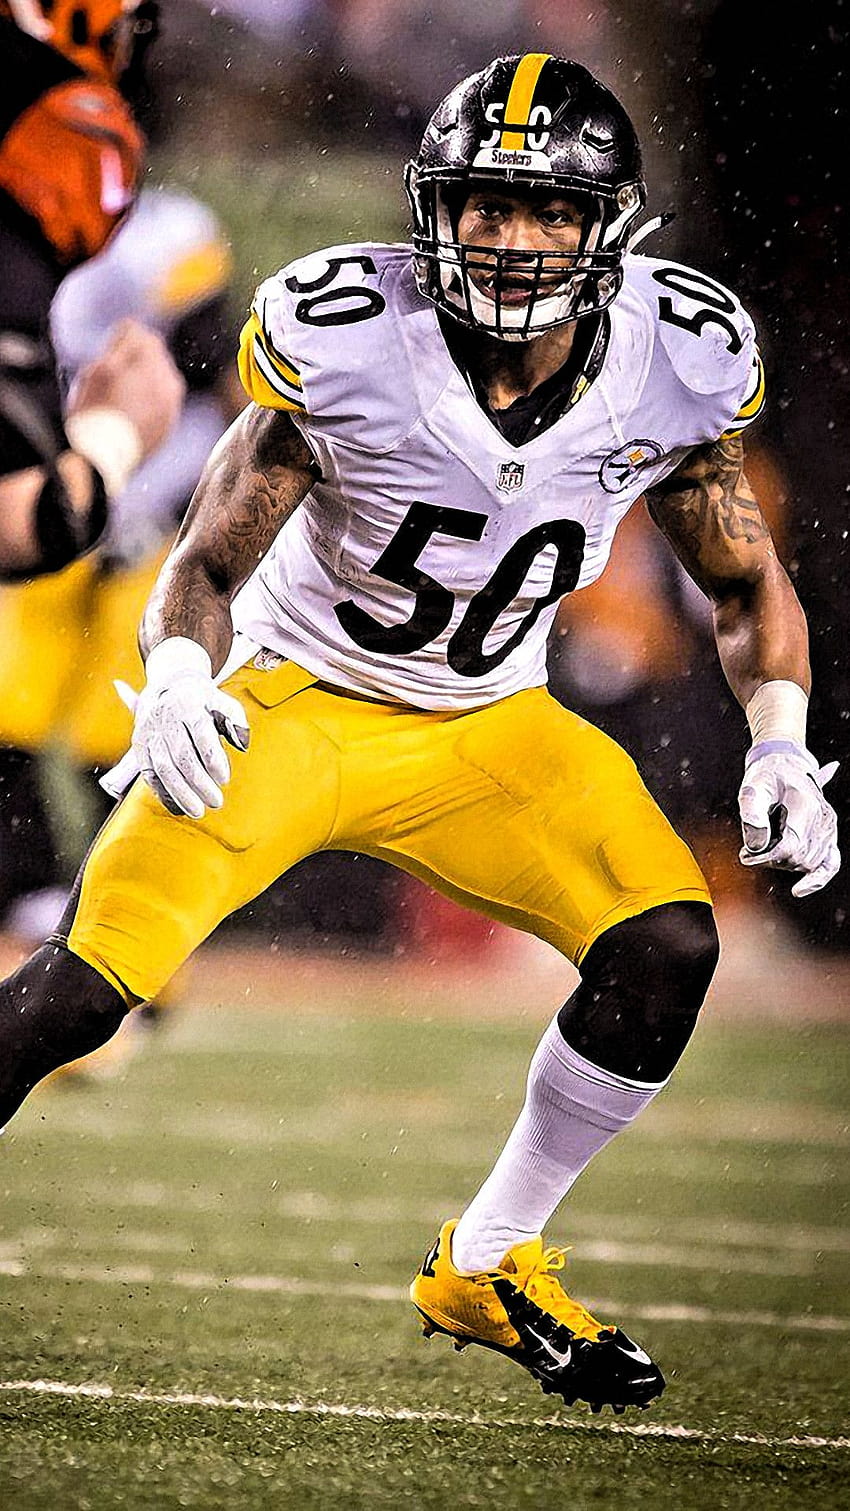 6 New Steelers for iPhone, steelers players HD phone wallpaper